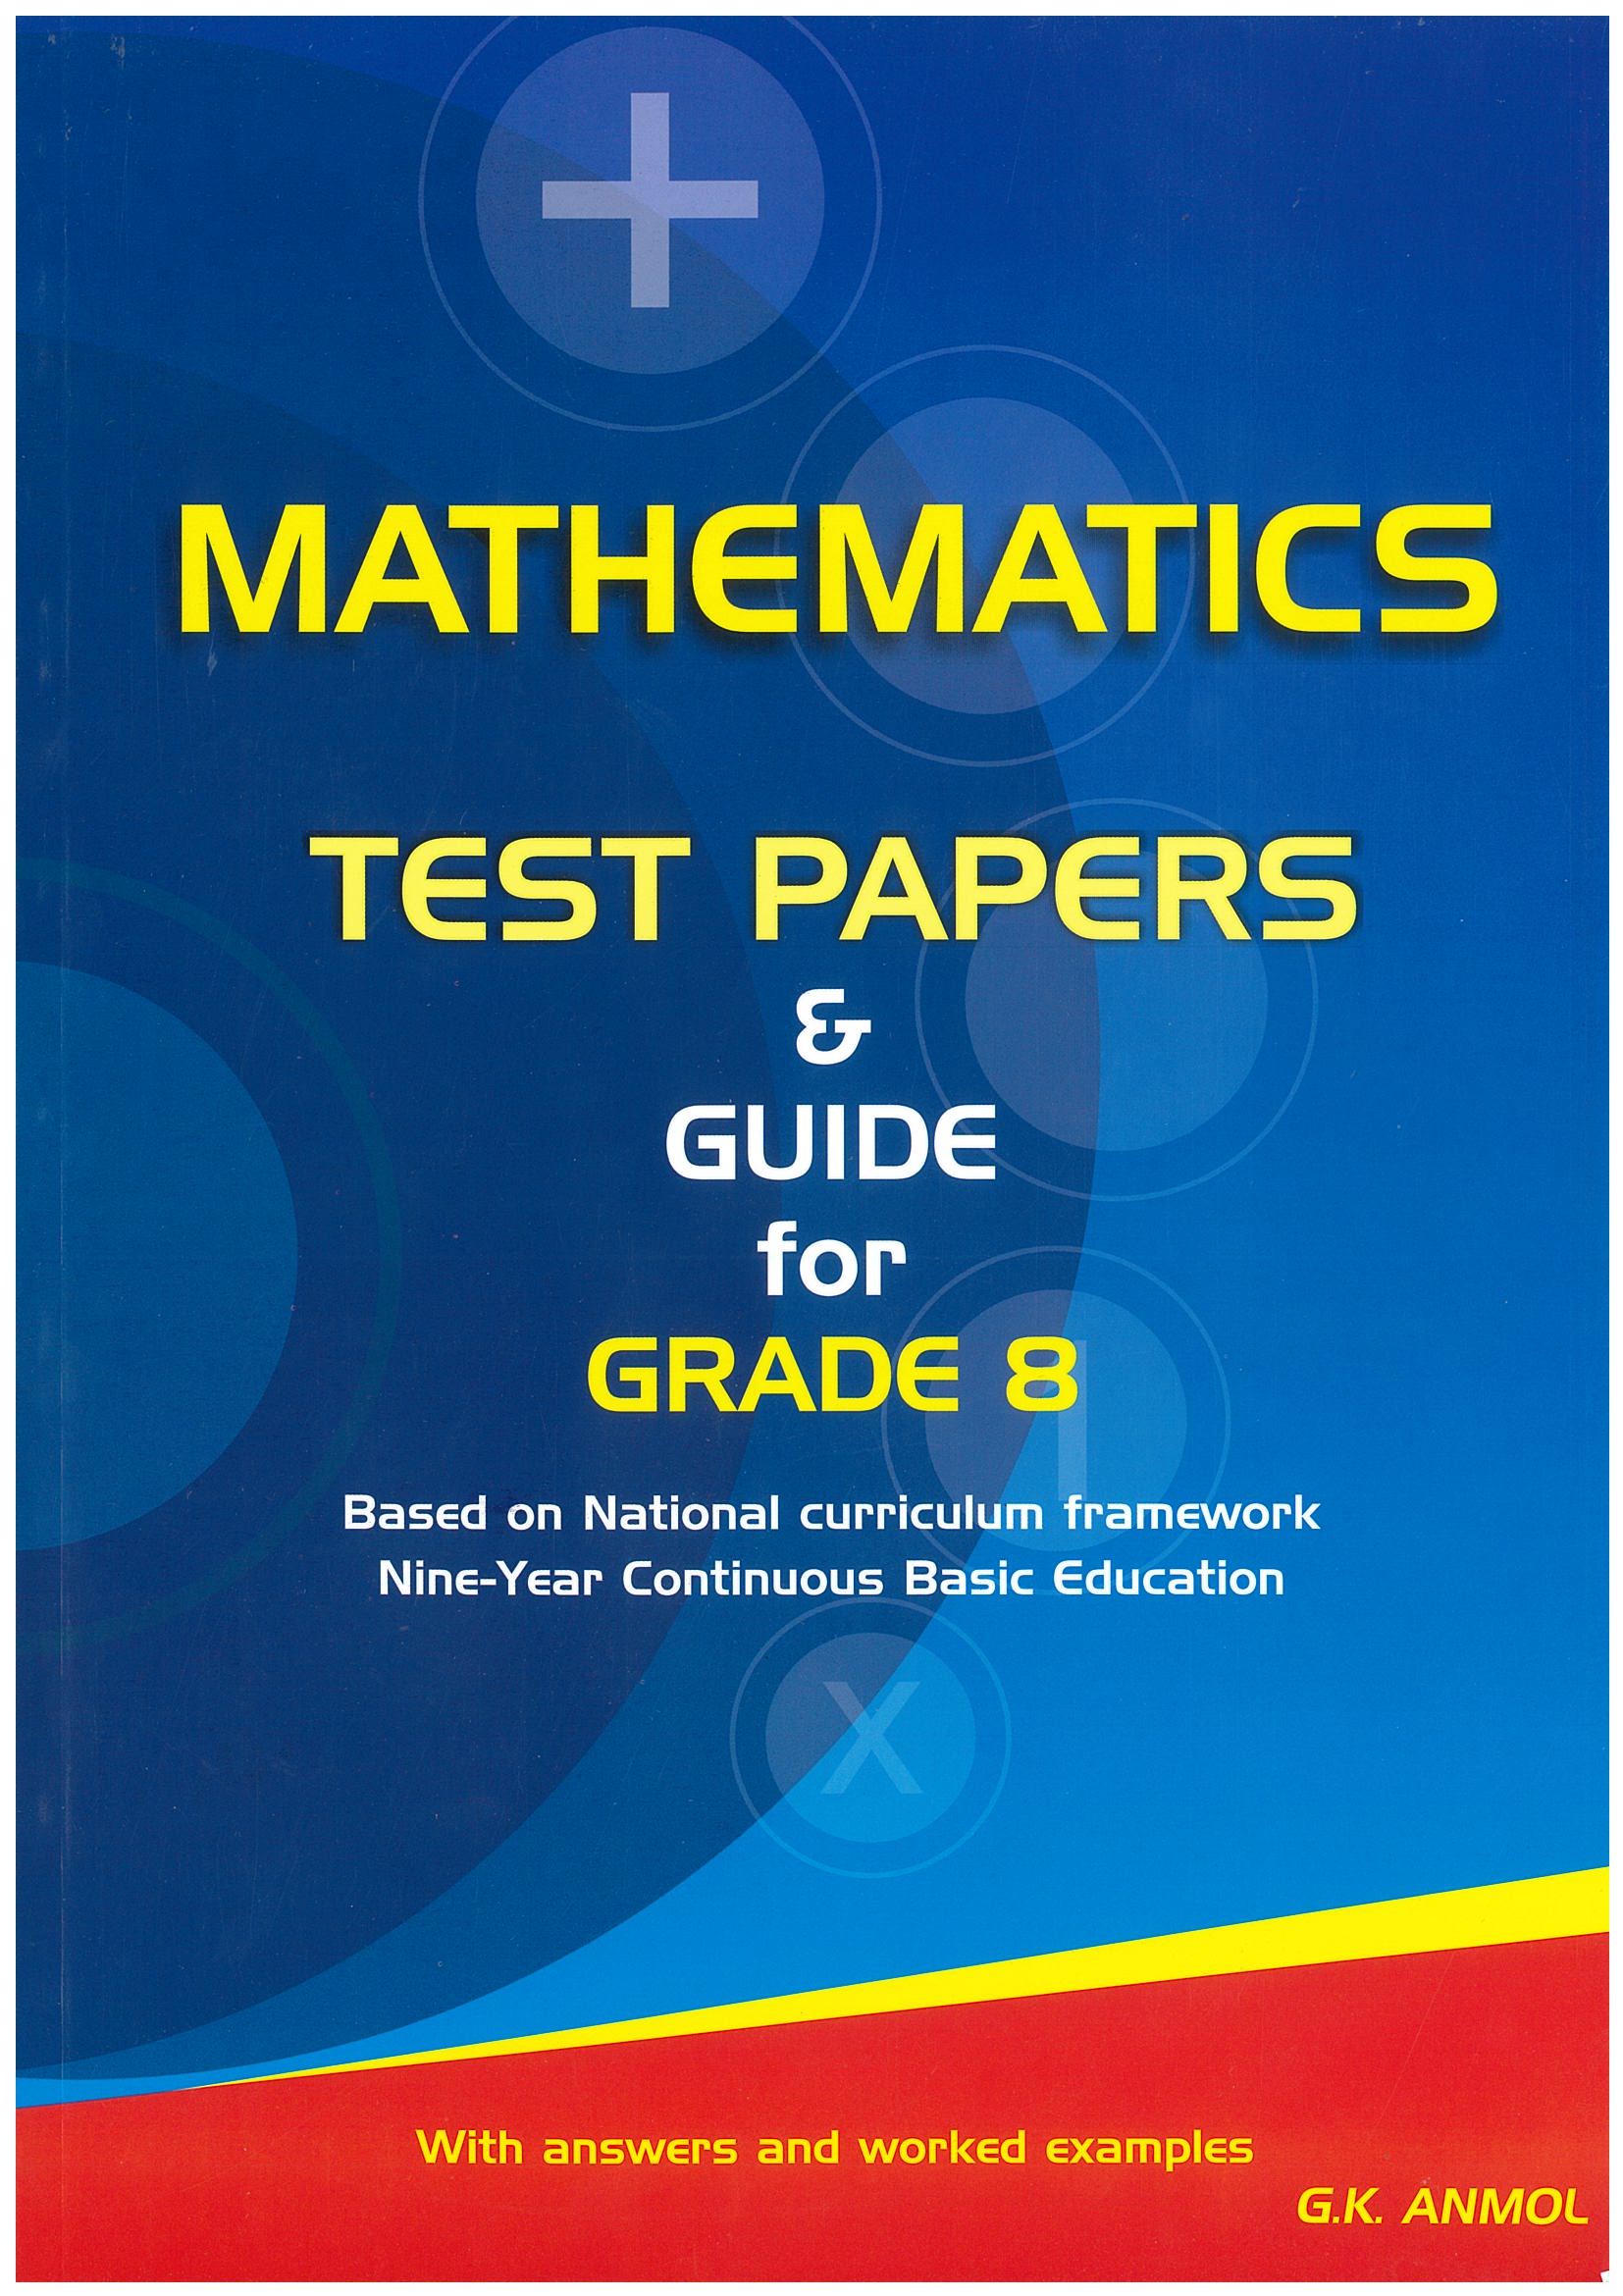 CON-MATHEMATICS TEST PAPERS & GUIDE FOR GRADE 8 (NEW 2019)